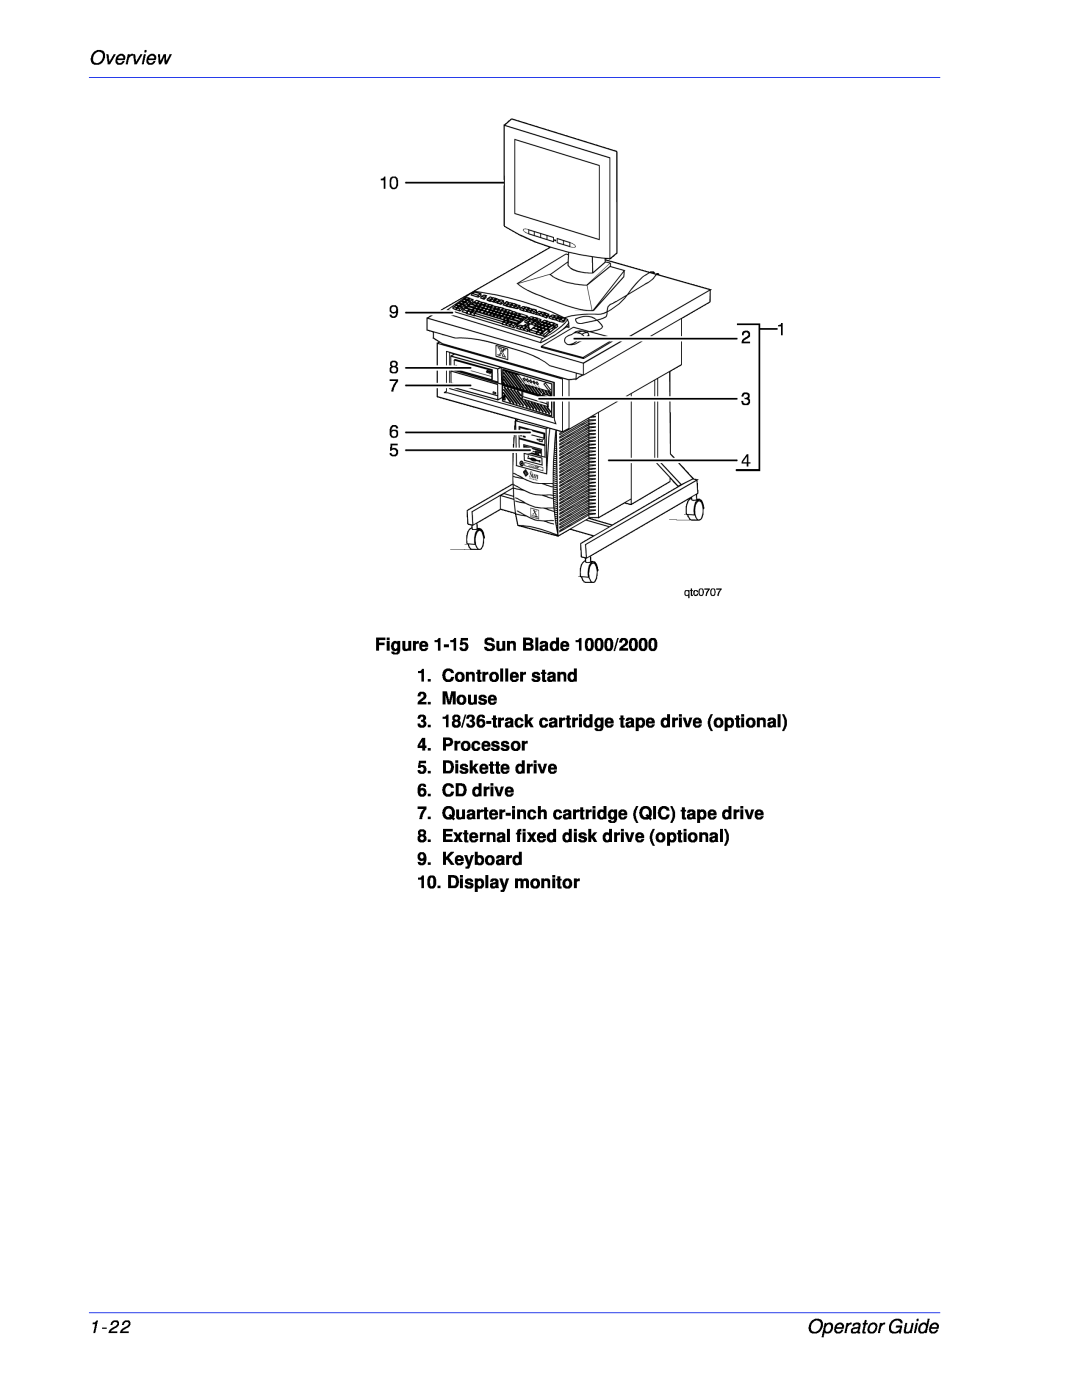 Xerox Overview, Operator Guide, 15Sun Blade 1000/2000 1.Controller stand, Mouse, Processor 5.Diskette drive 6.CD drive 